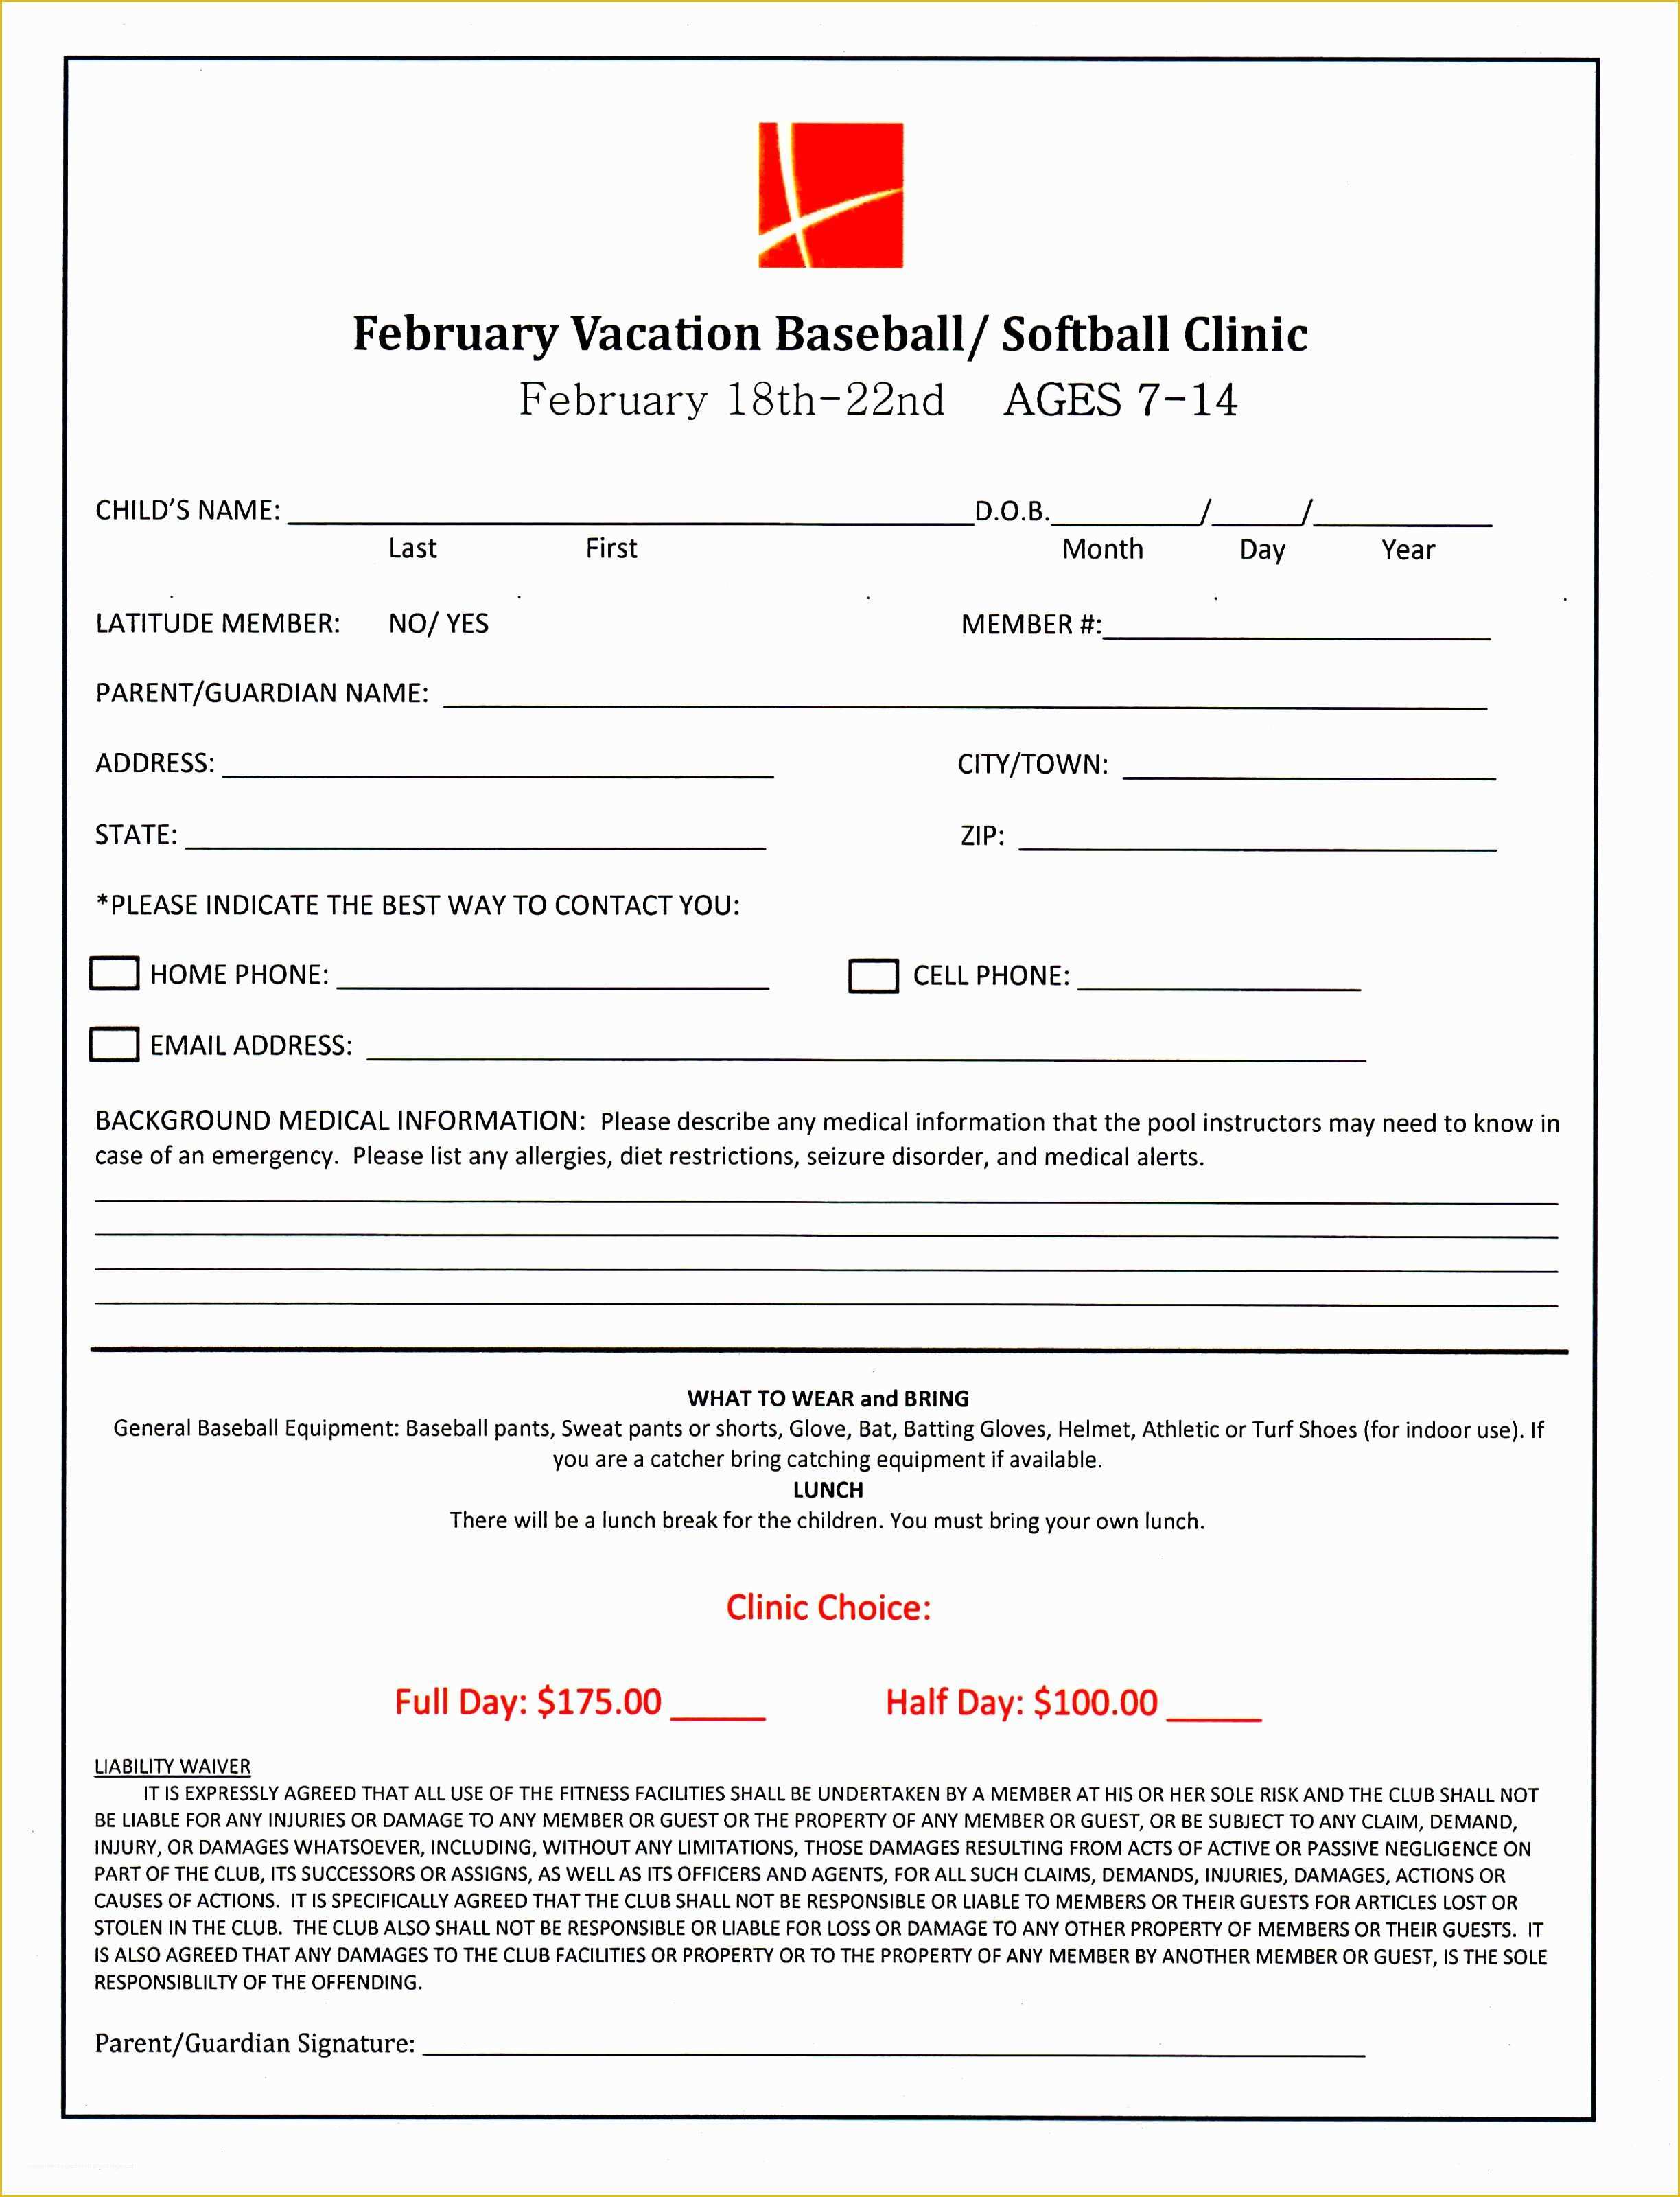 Registration form Template Free Download Of 7 Baseball Registration form Template Piuur